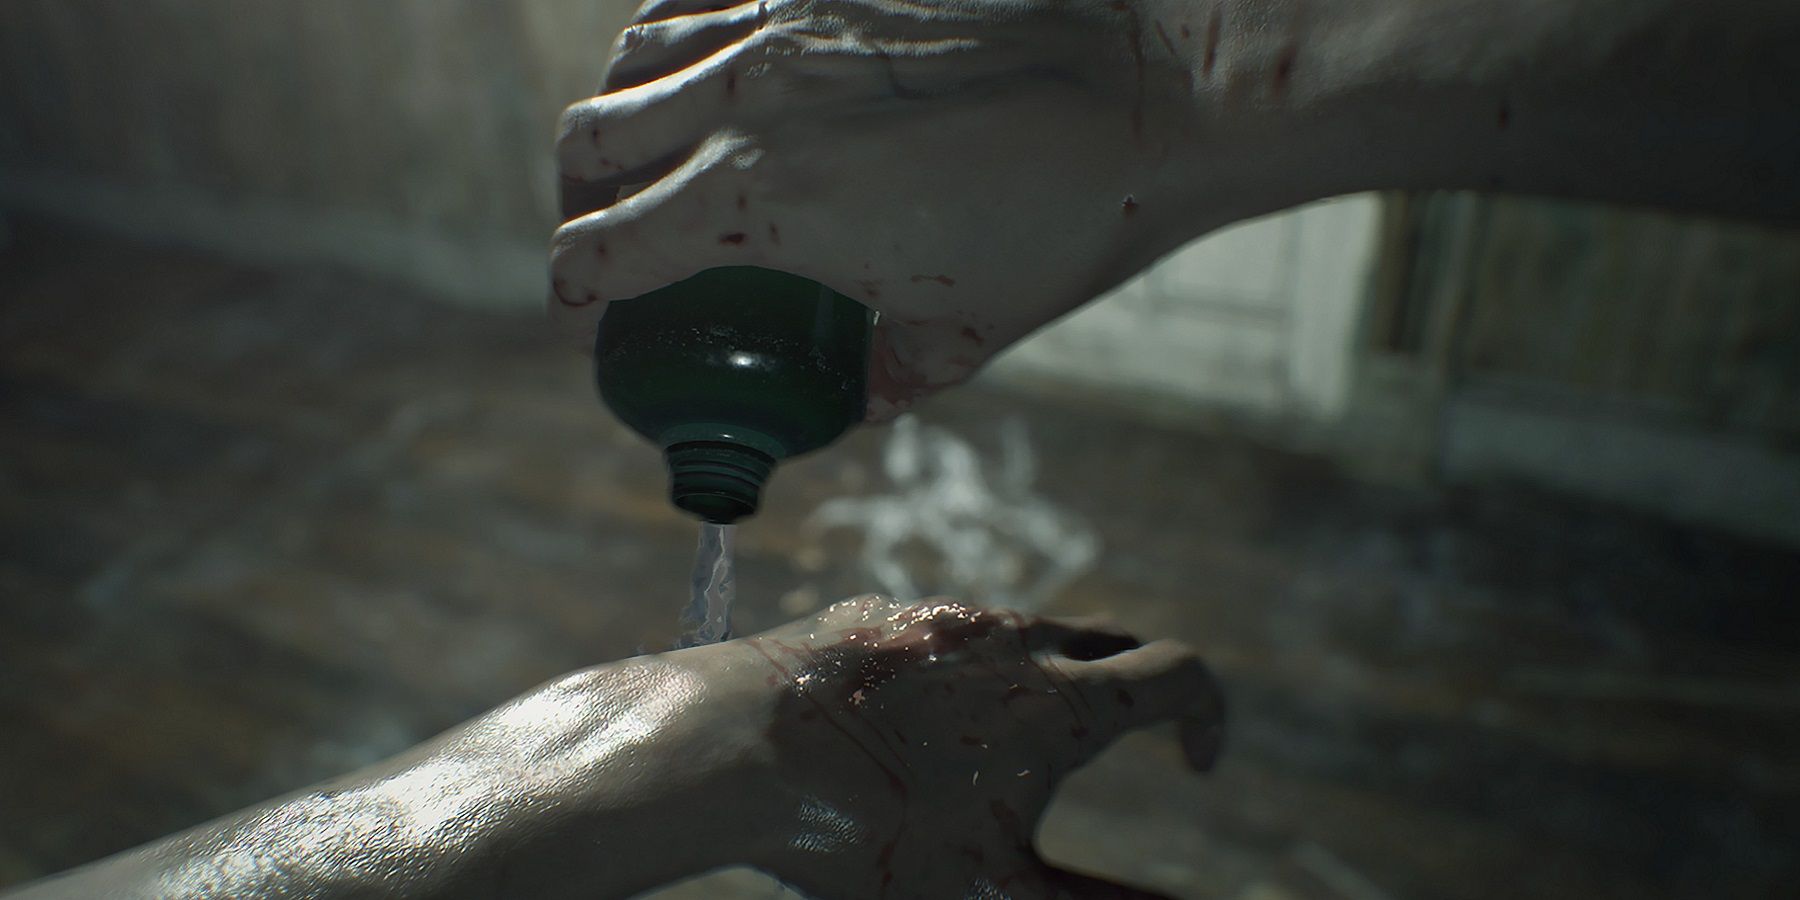 Screenshot from Resident Evil 7 showing Ethan pouring a substance onto his injured hand.